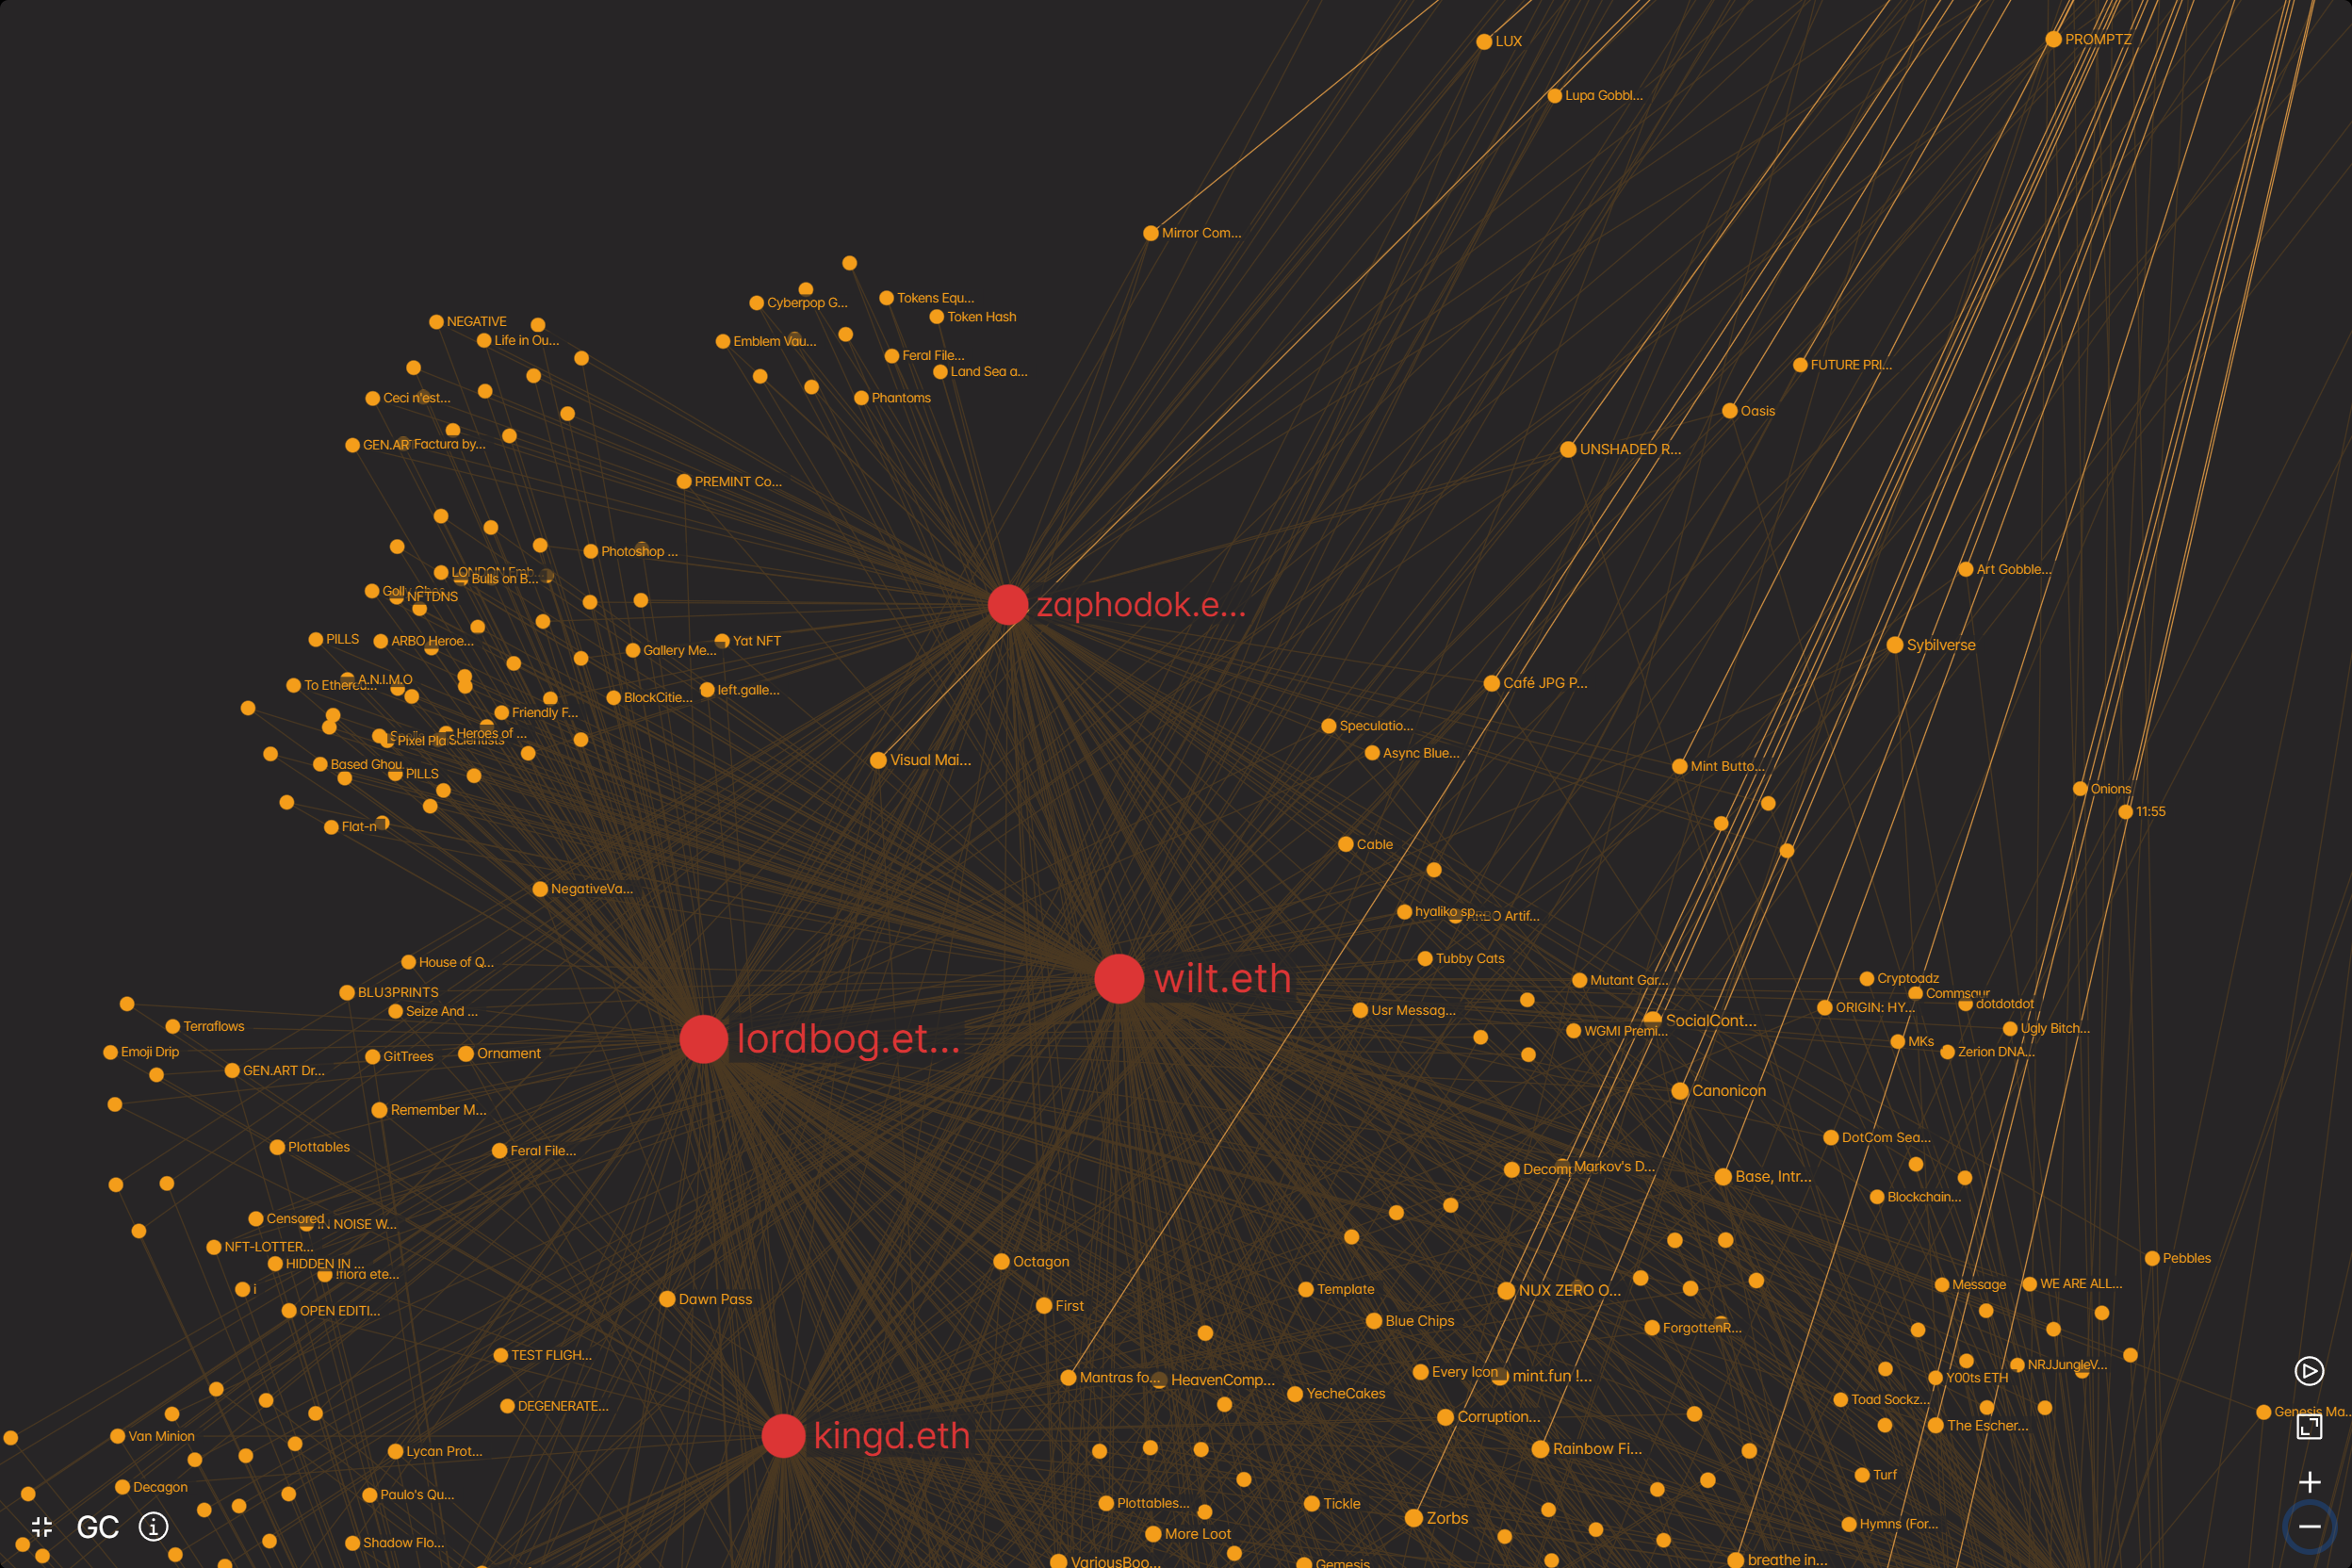 A network map with golden nodes and rays against a dark background, with large nodes depicted in red